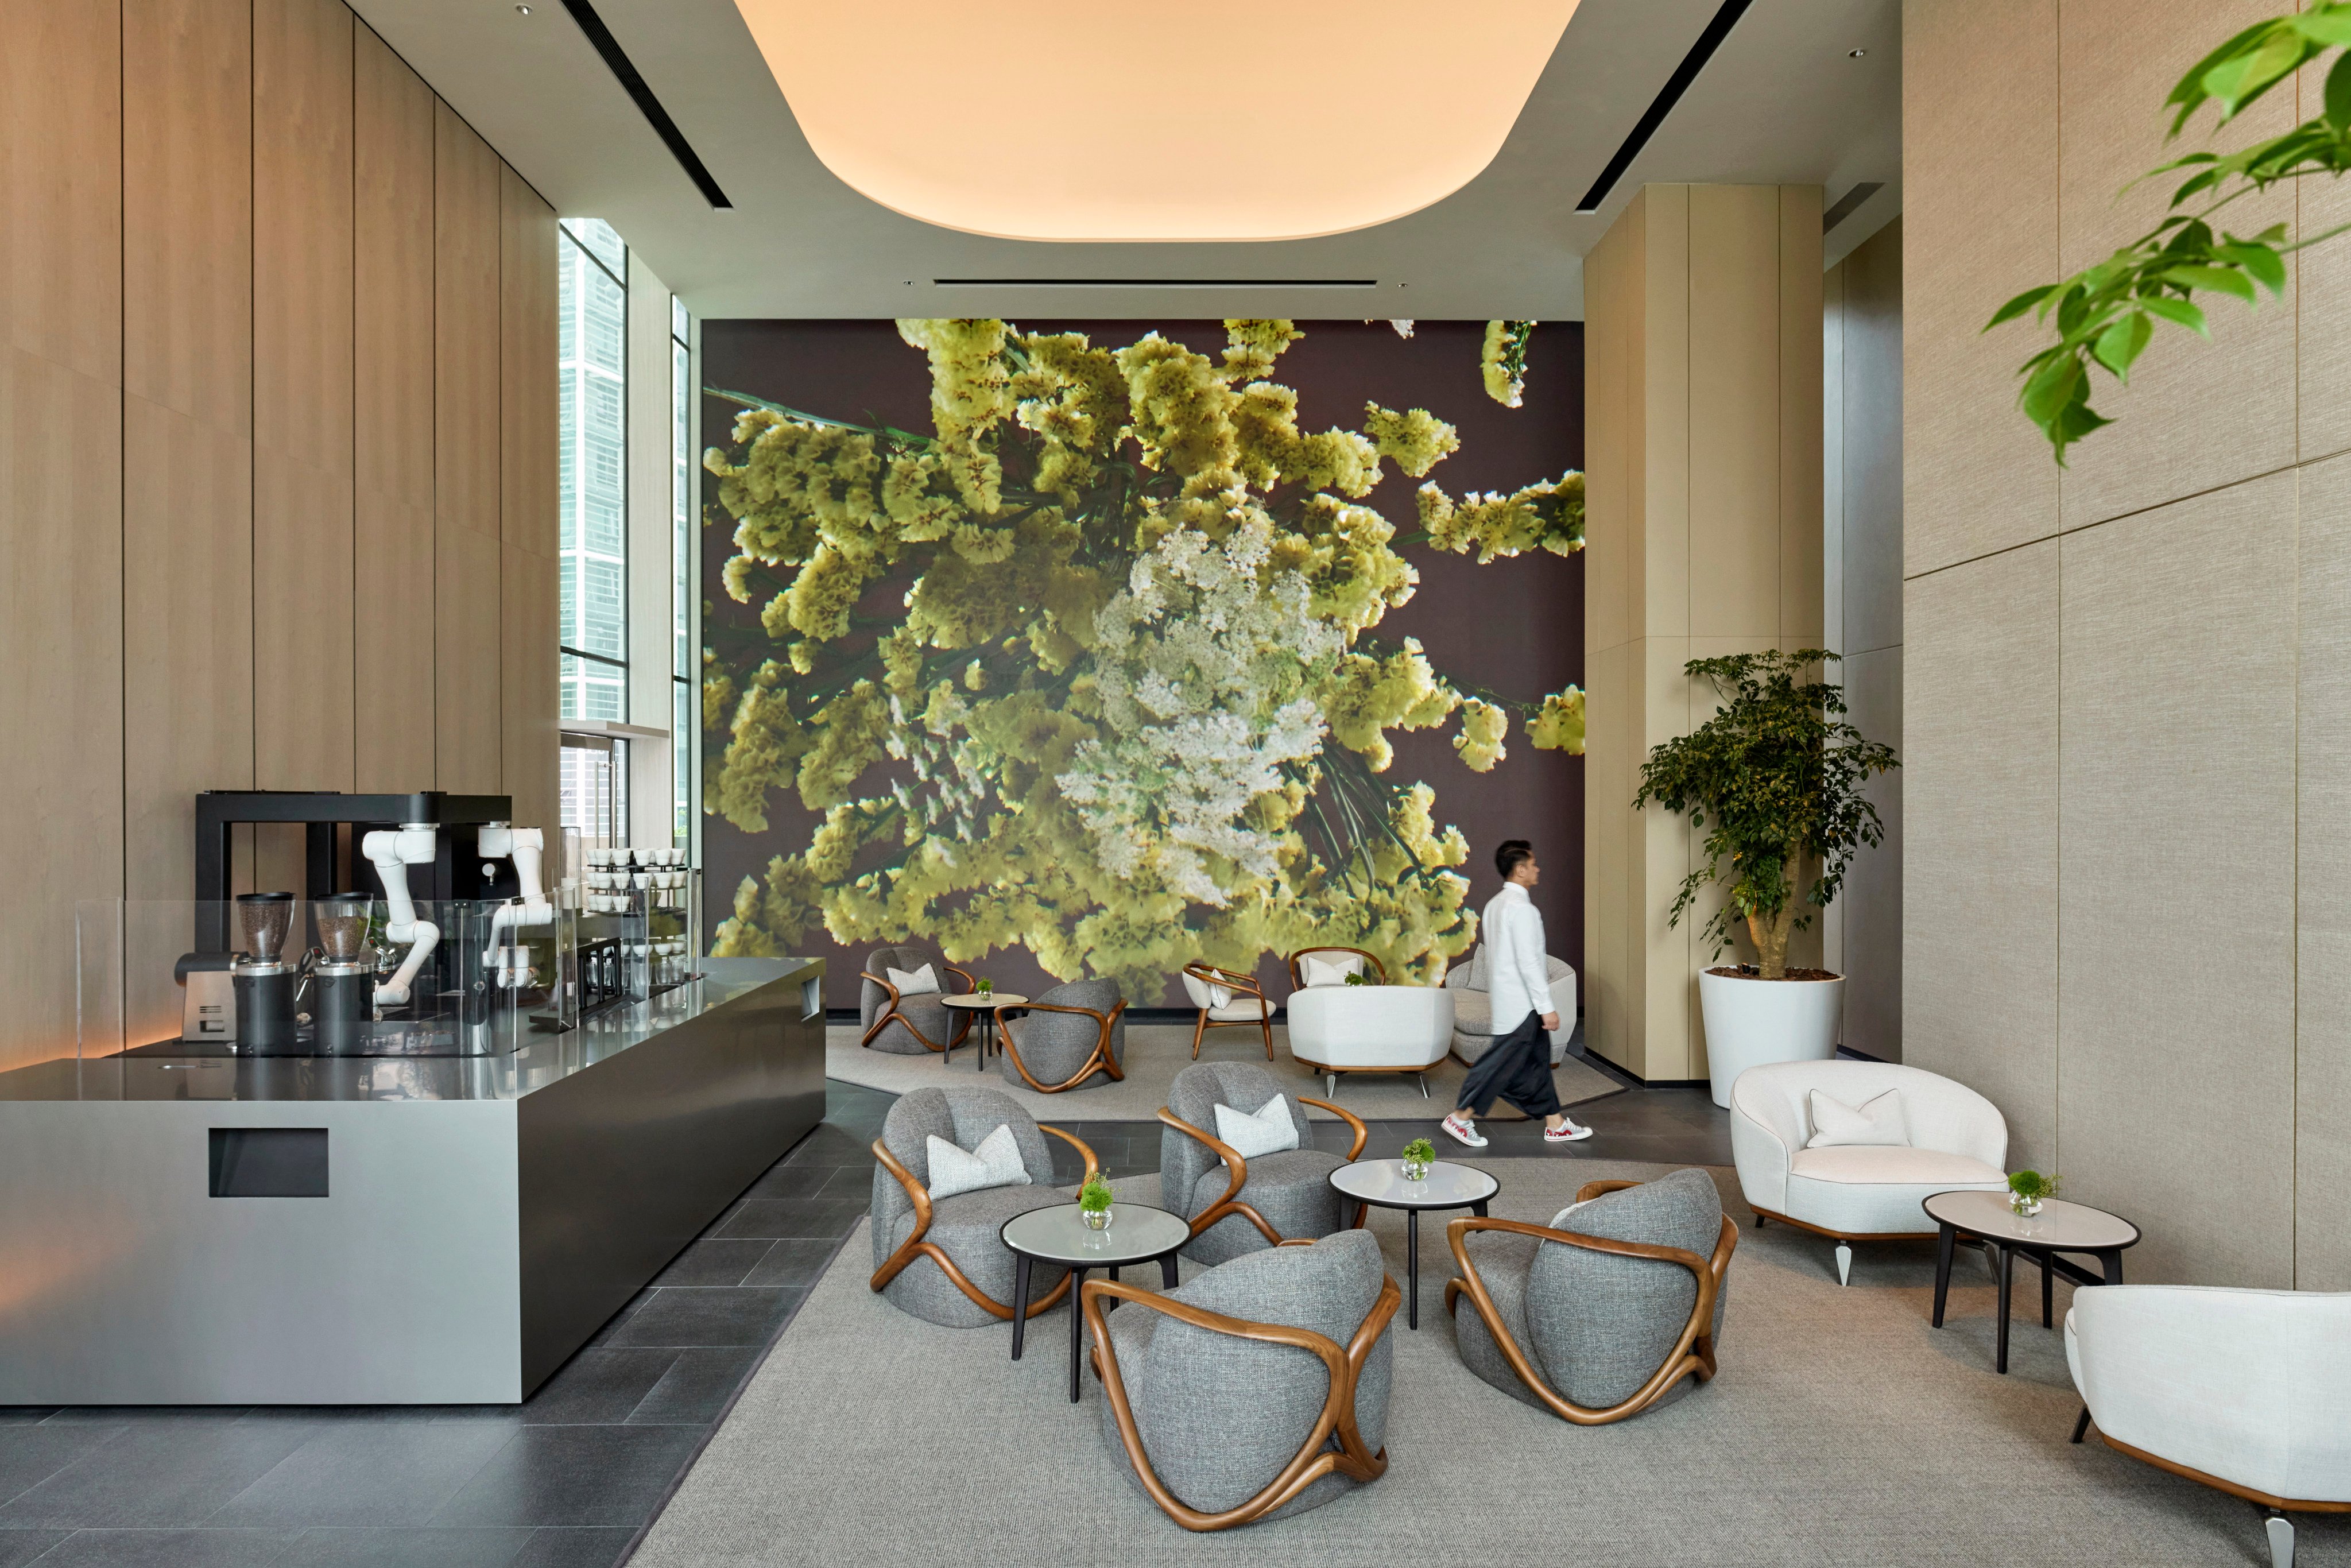 The Lobby Lounge at Como Metropolitan Singapore. The hotel is part of the Como Orchard complex that includes patissier Cédric Grolet, and a Club 21 multi-label store with Thom Browne, Jacquemus and Simone Rocha. Photos: Handout